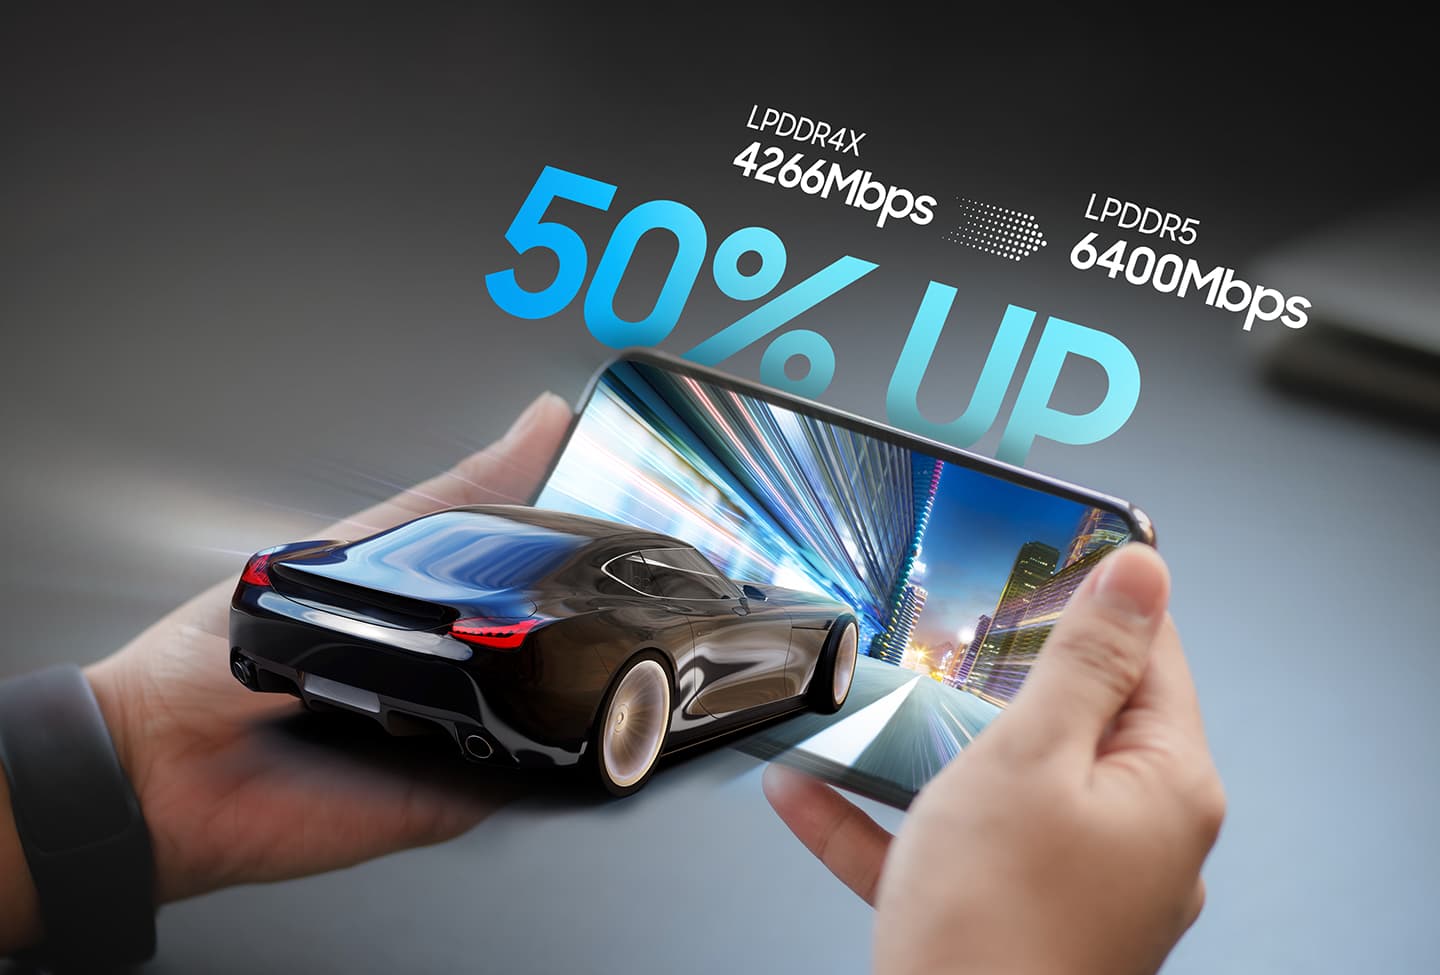 An image is holding a cell phone with both hands, and the car is going into the screen and the screen showing e of speed. This is an image showing a 50% improvement over performance for LPDDR5.